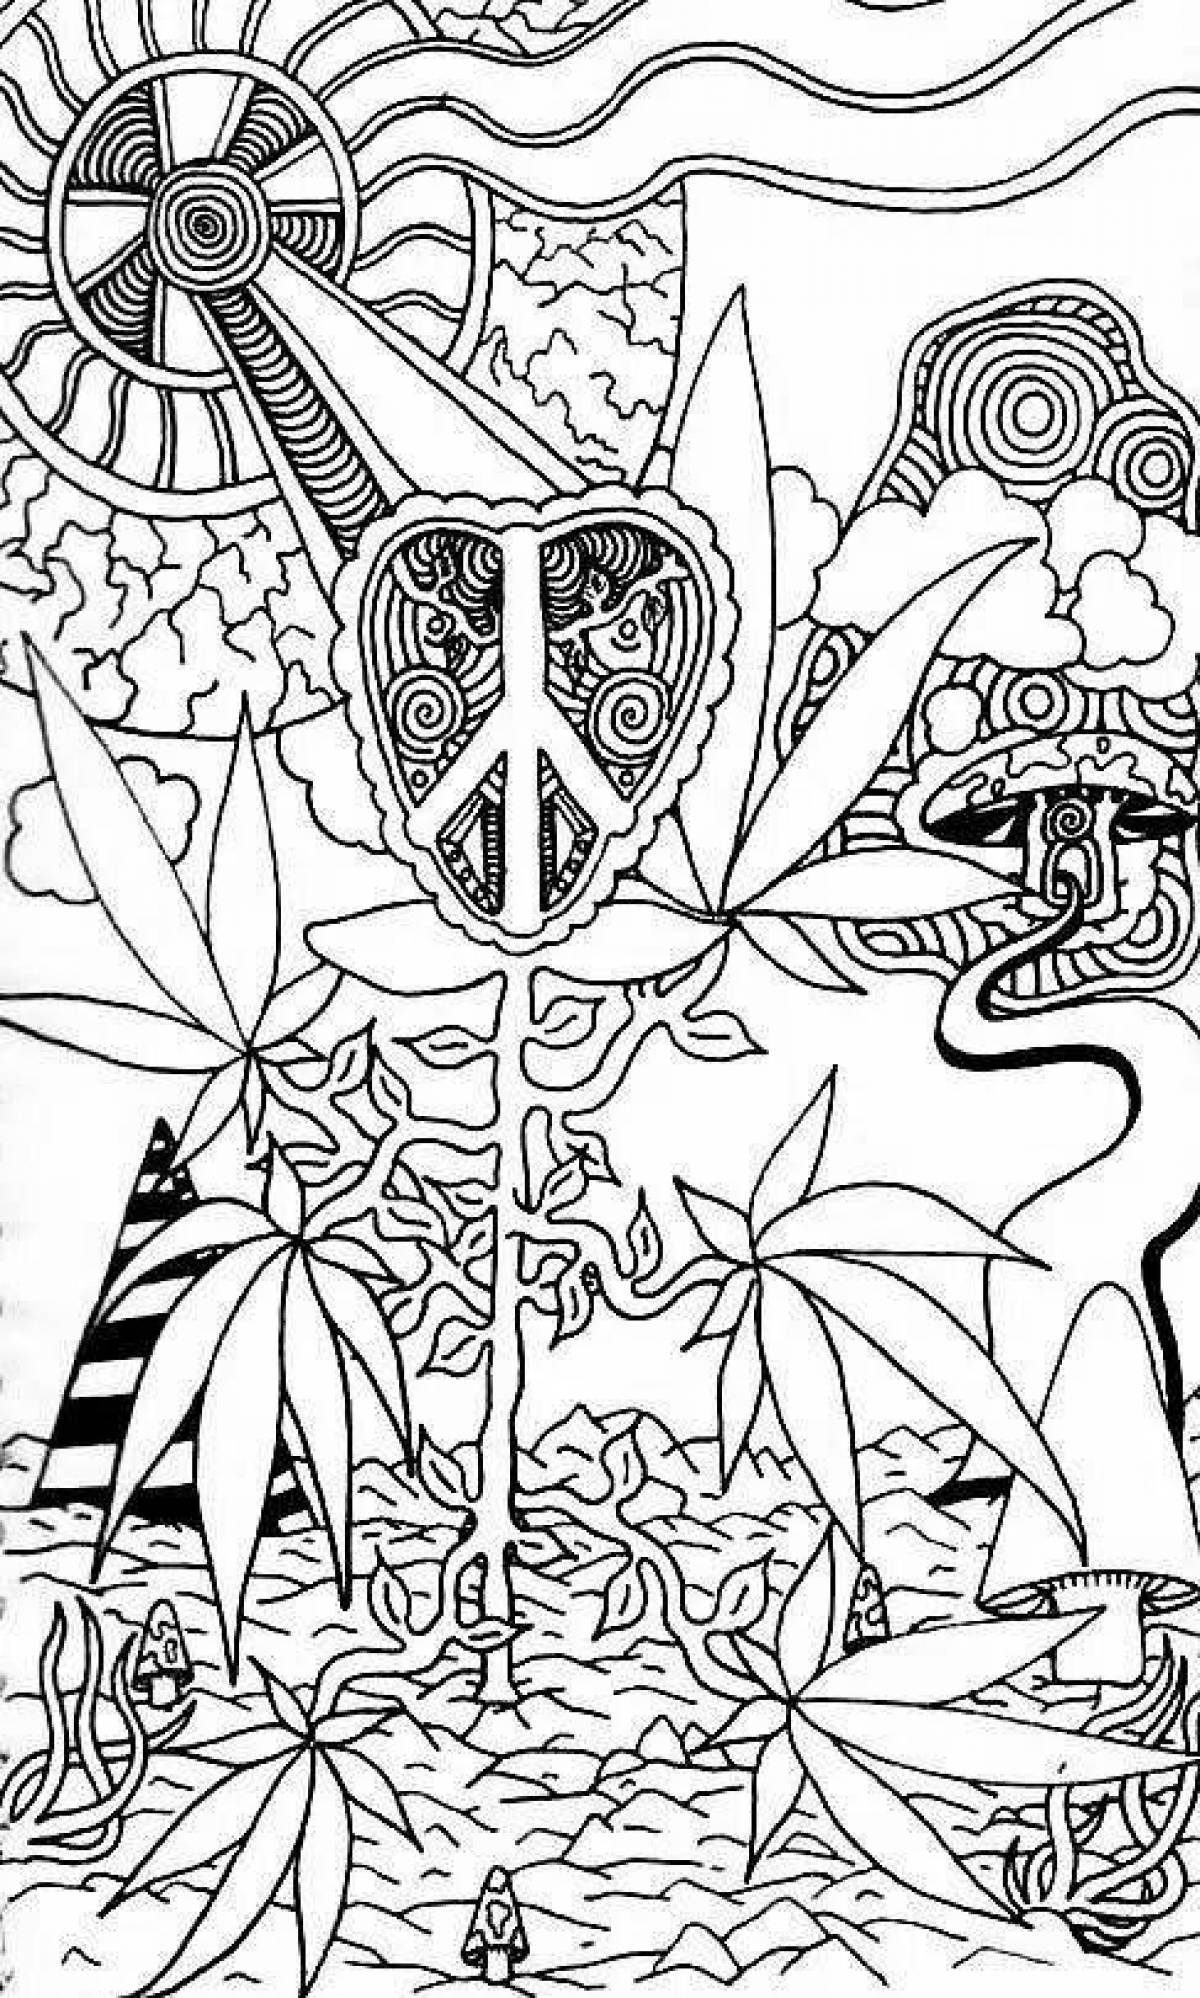 Abstract psychedelic coloring book